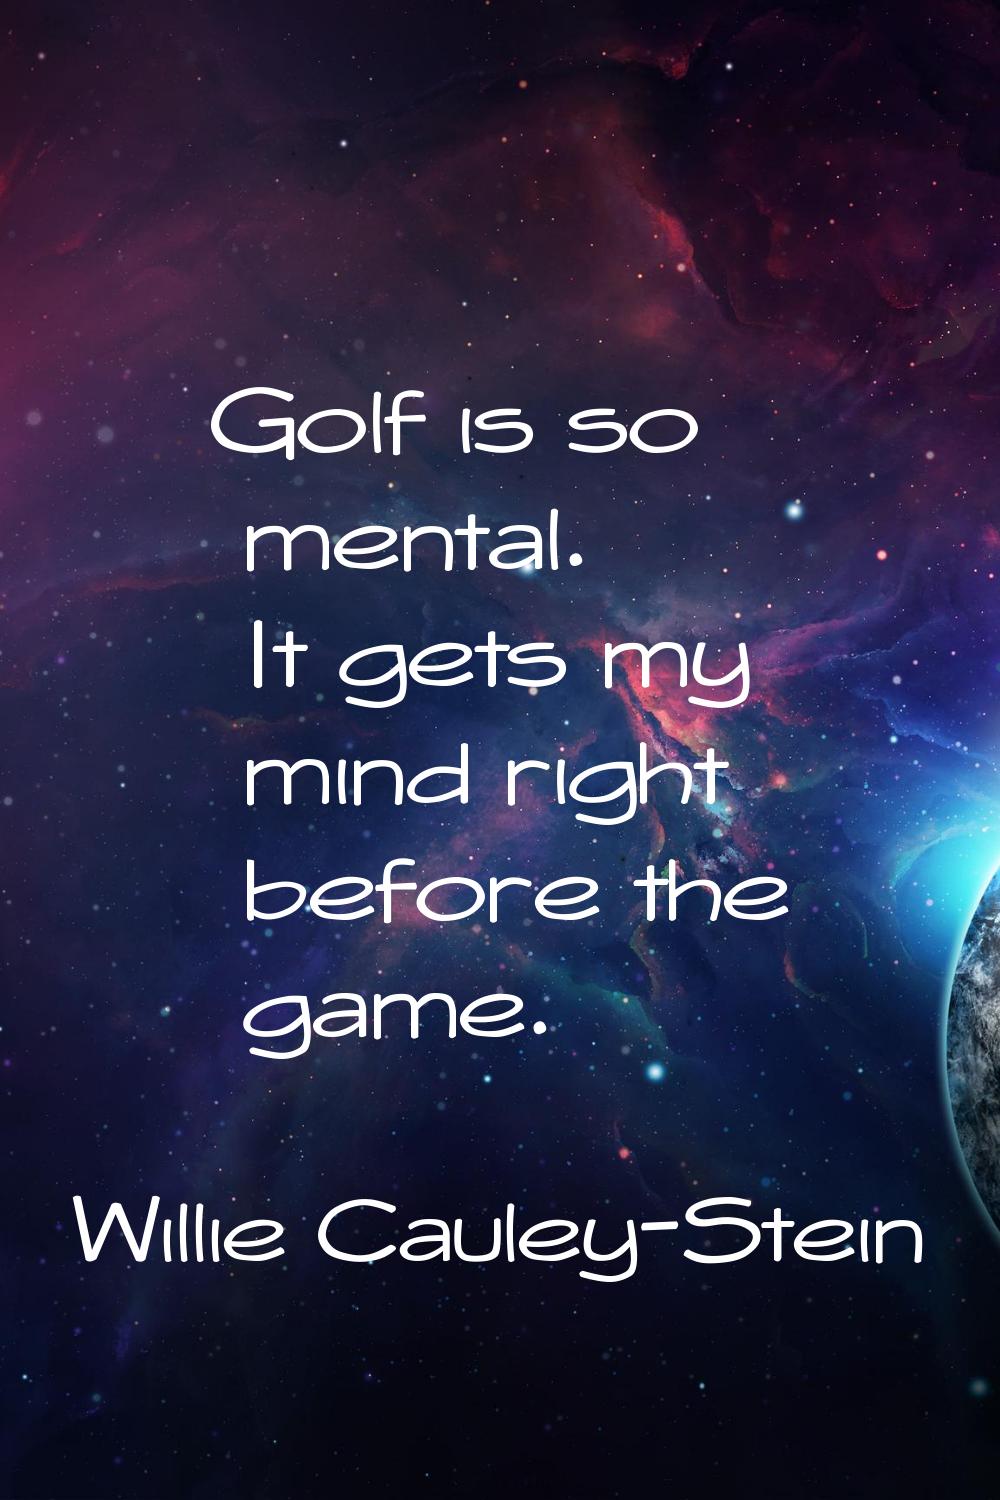 Golf is so mental. It gets my mind right before the game.